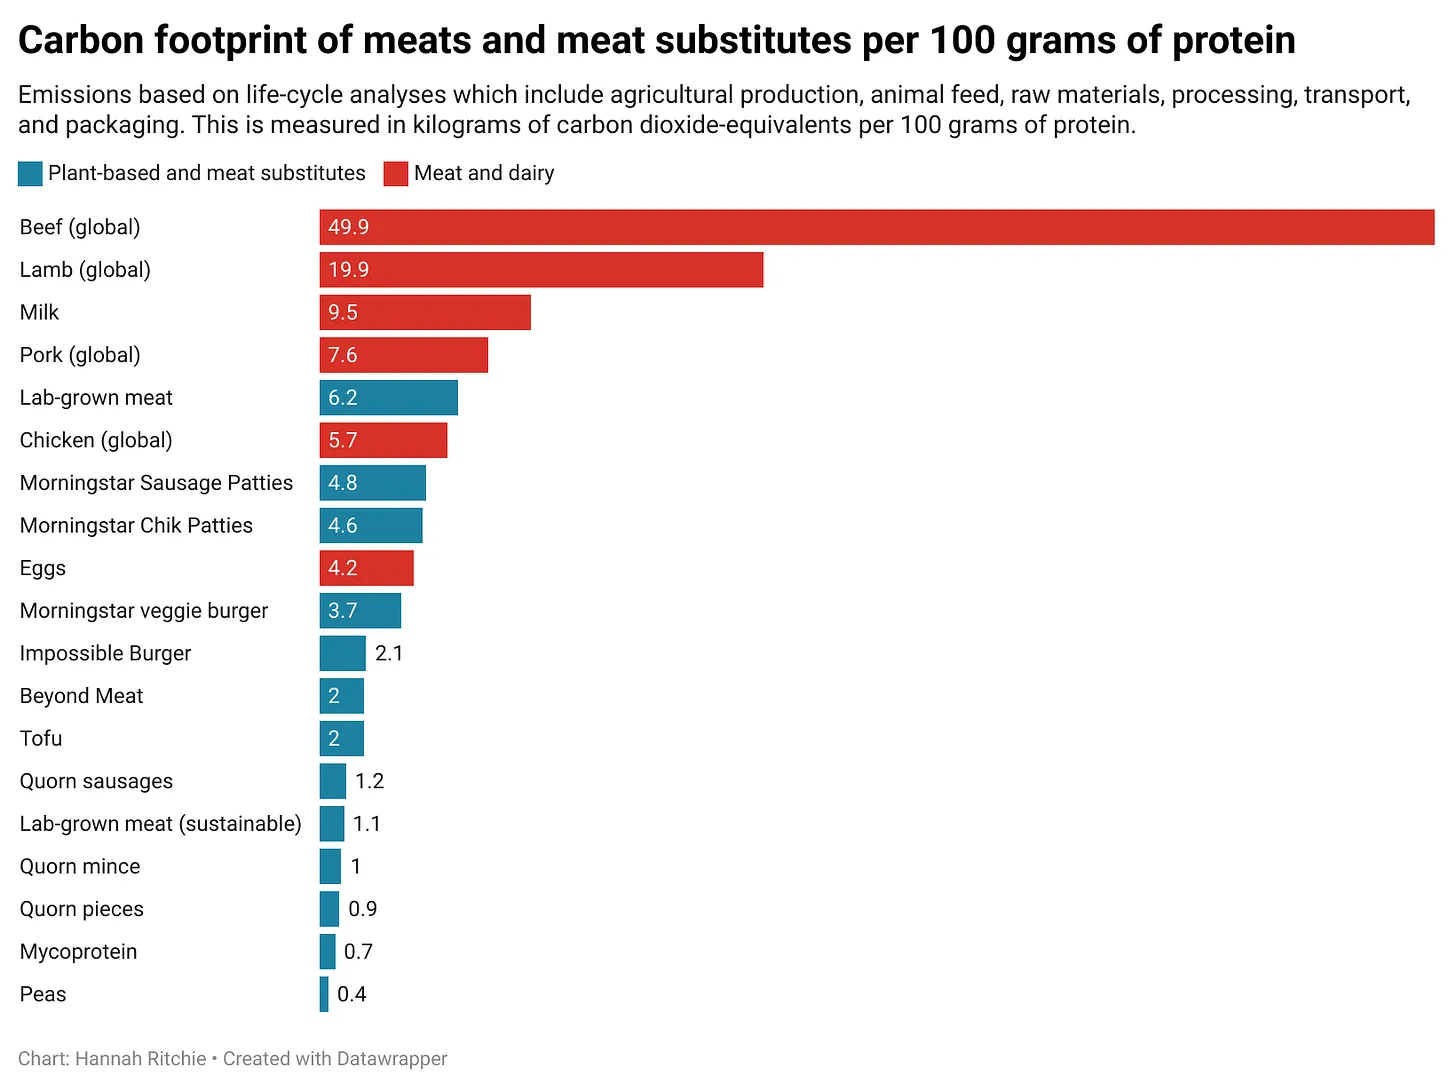 Are meat substitutes really better for the environment than meat?